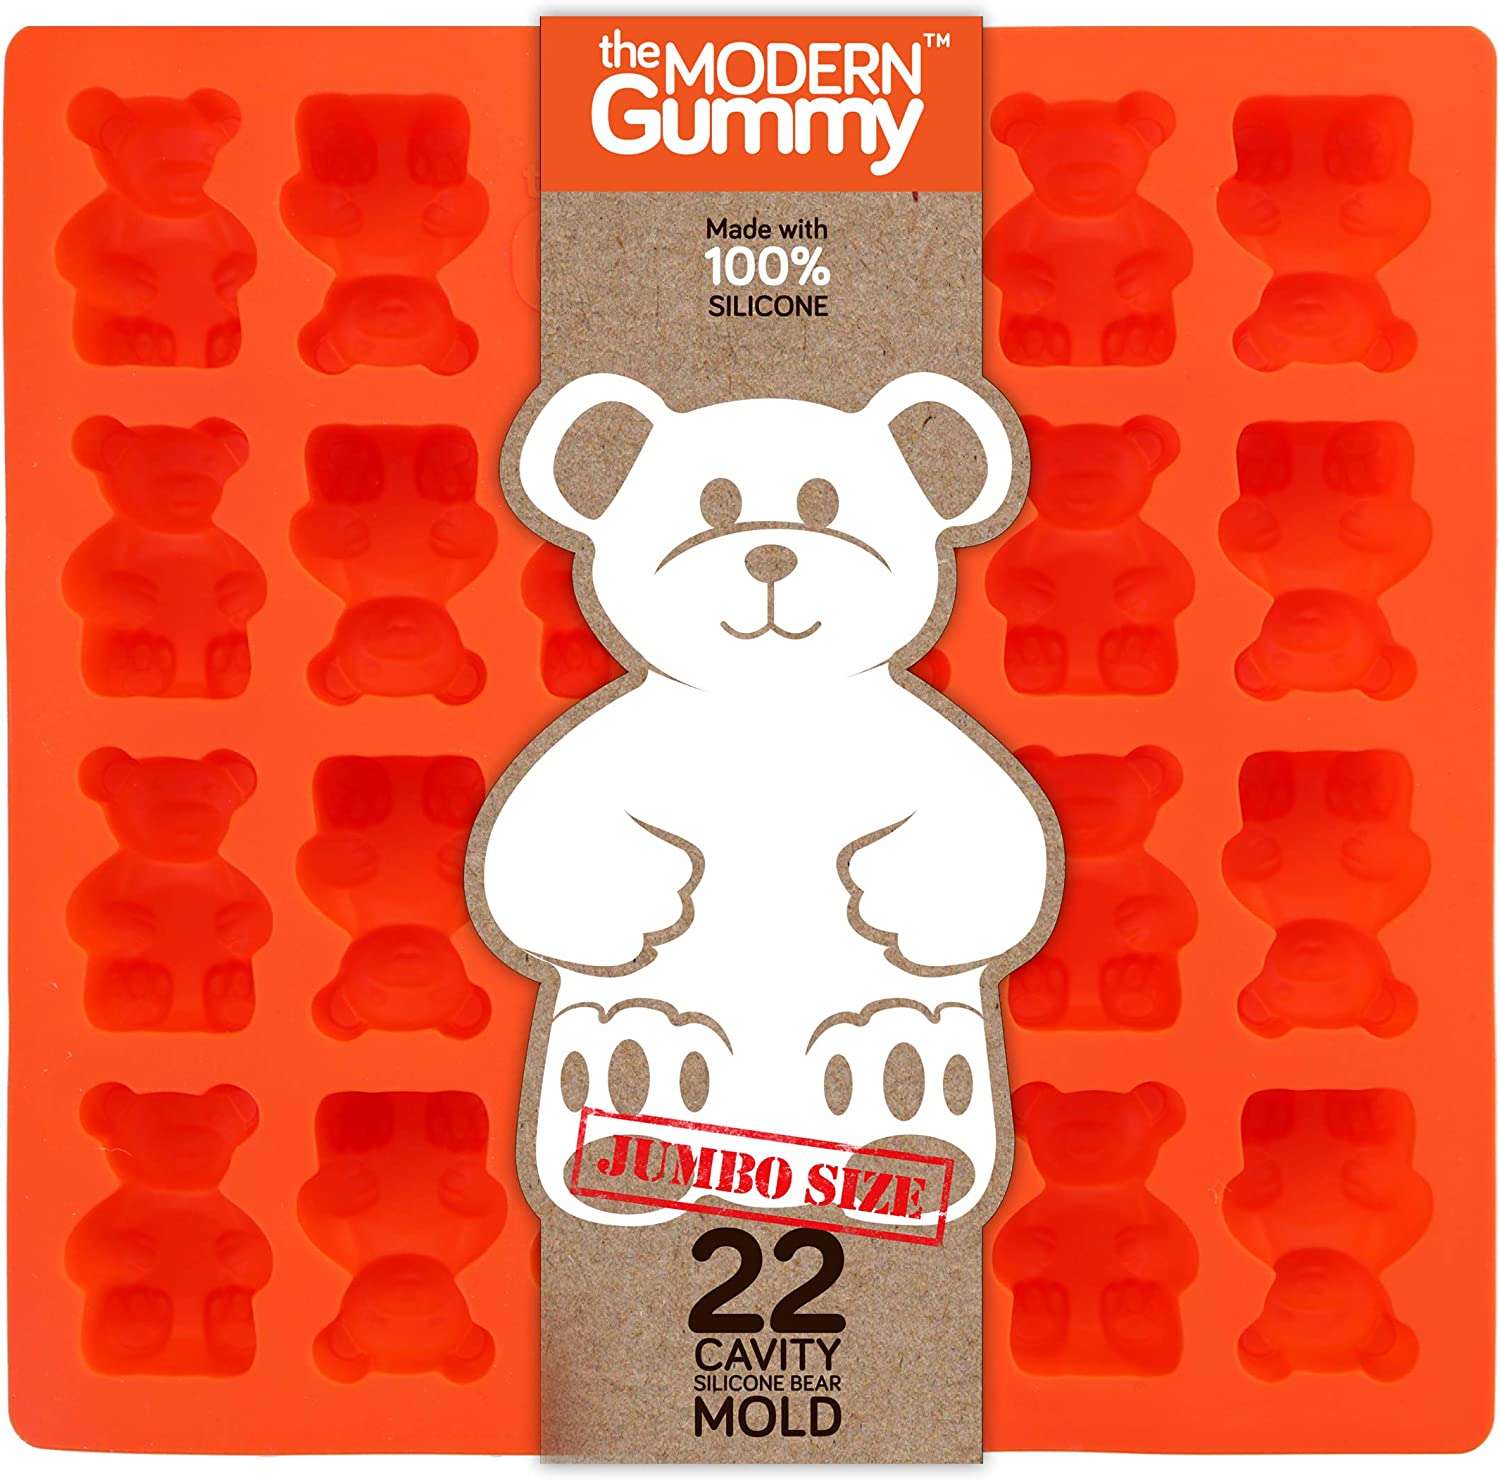 13. The Modern Gummy Candy & Chocolate Mold